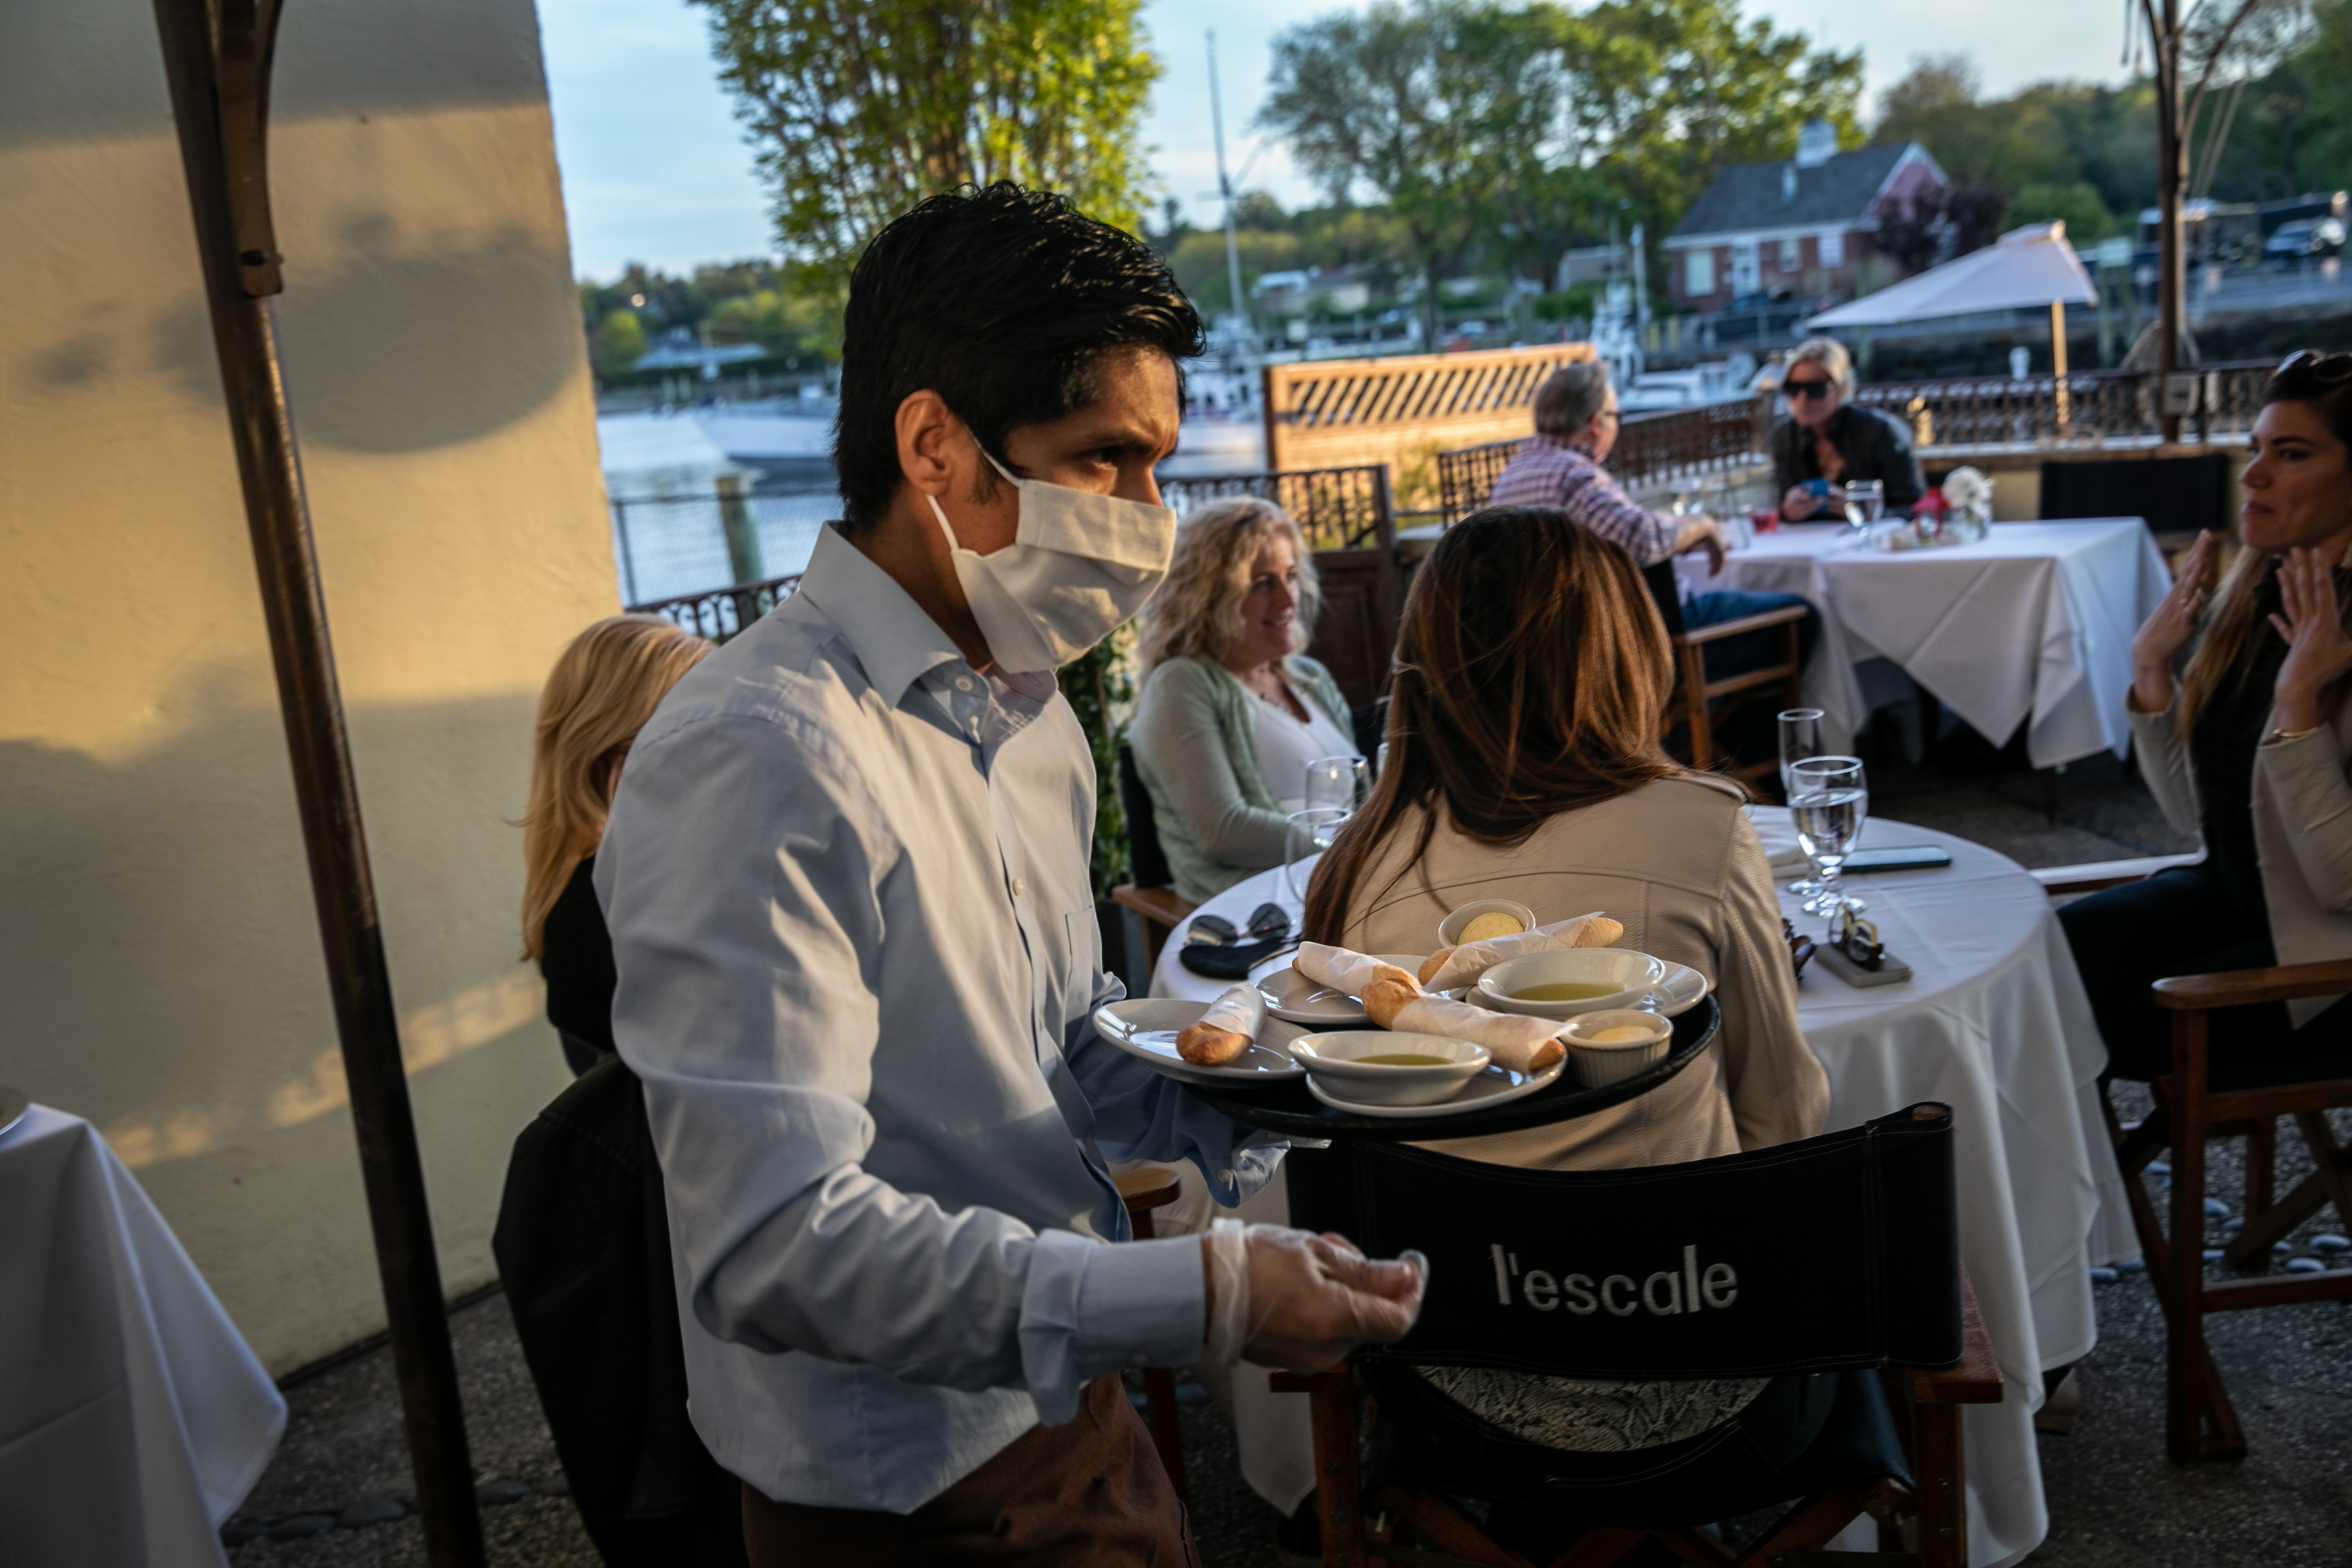 A waiter serves patrons at L'escale restaurant on May 20, 2020 in Greenwich, Connecticut. (Photo: John Moore/Getty Images)